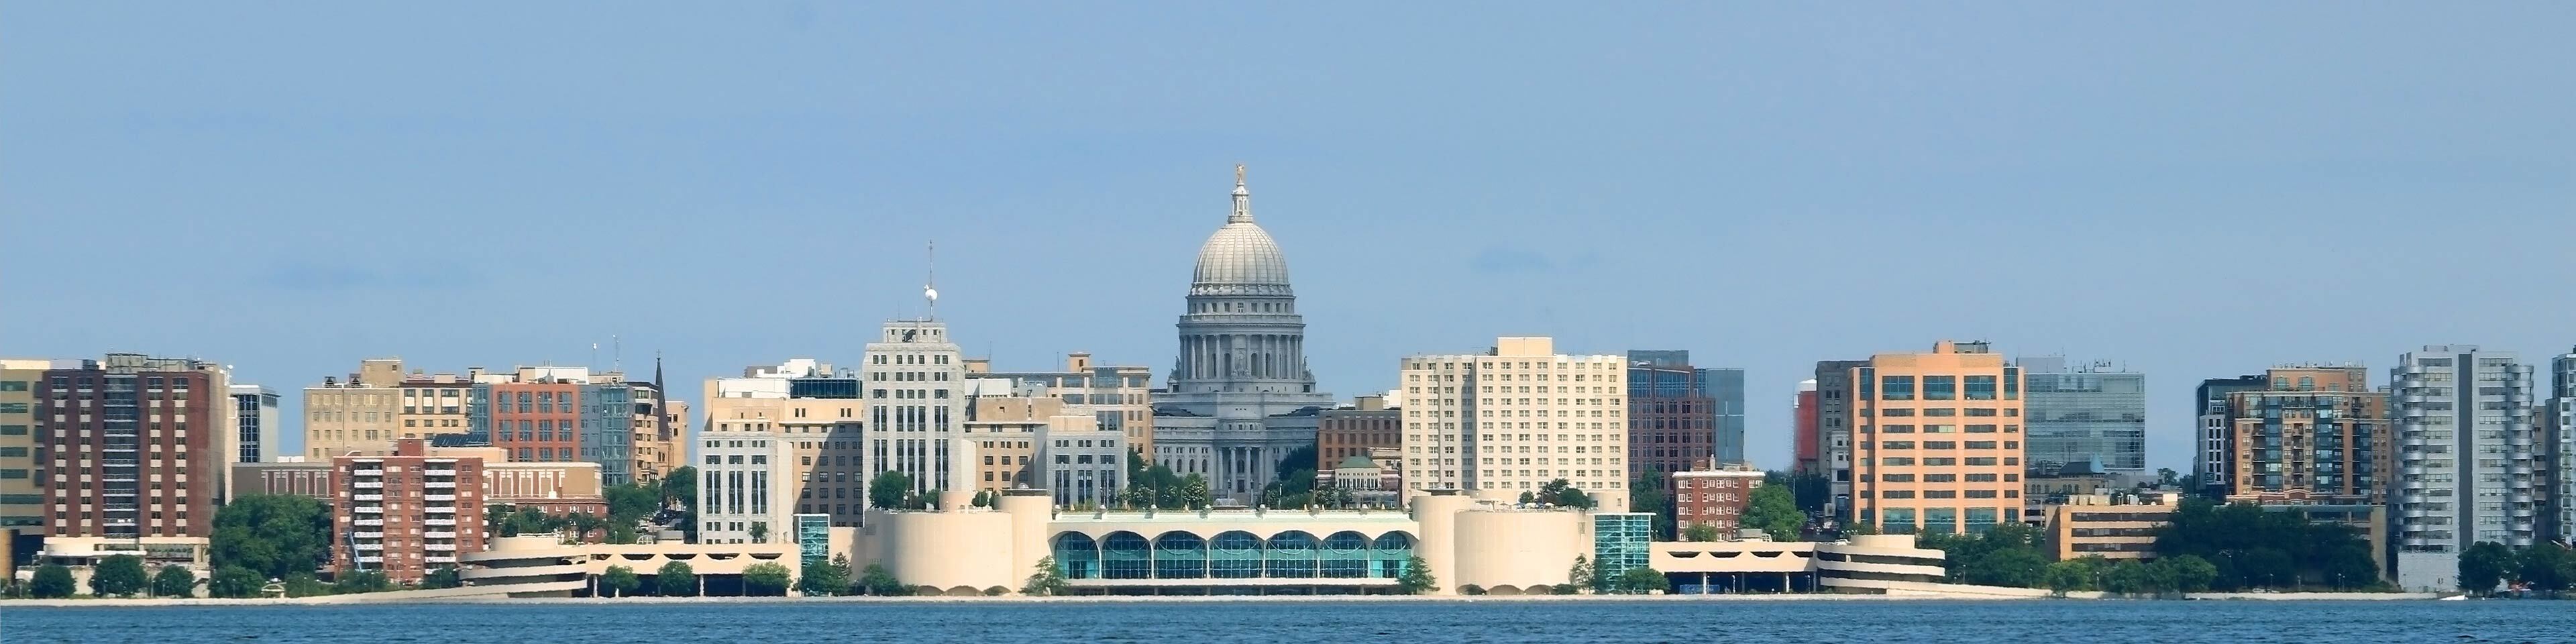 Wisconsin enacts new limited liability company and limited partnership laws